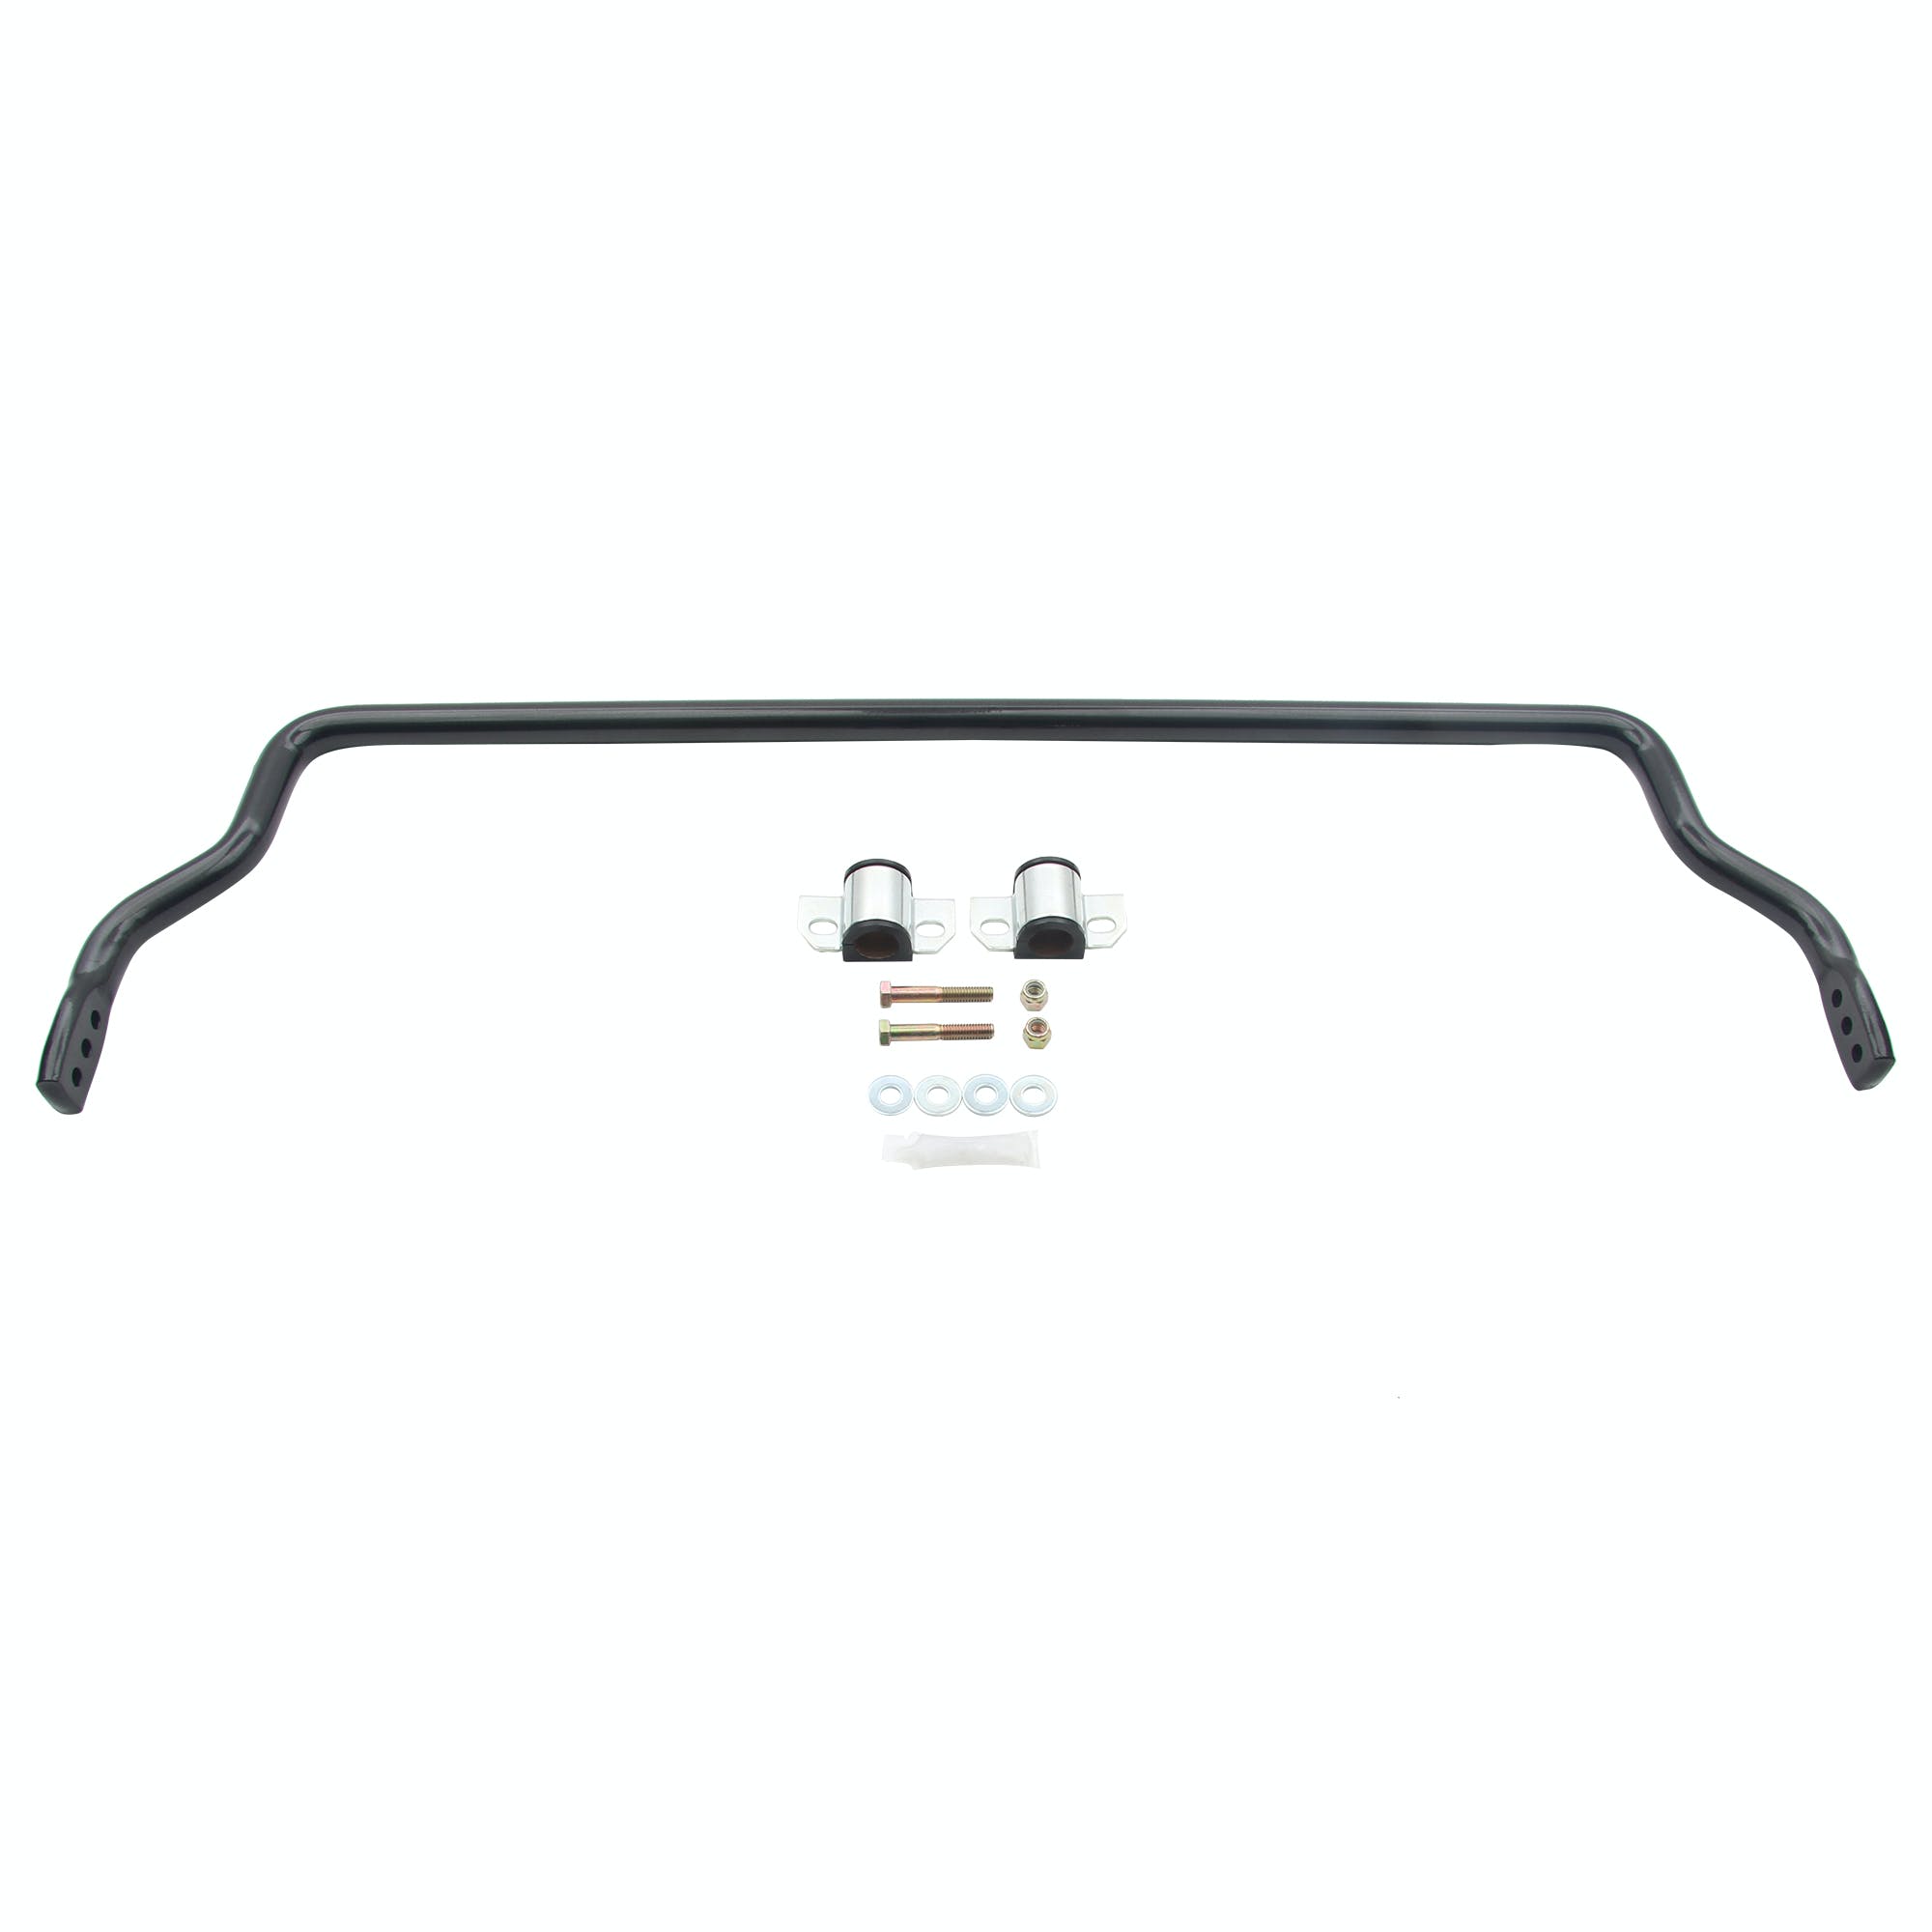 ST Suspensions 50190 Front Anti-Swaybar